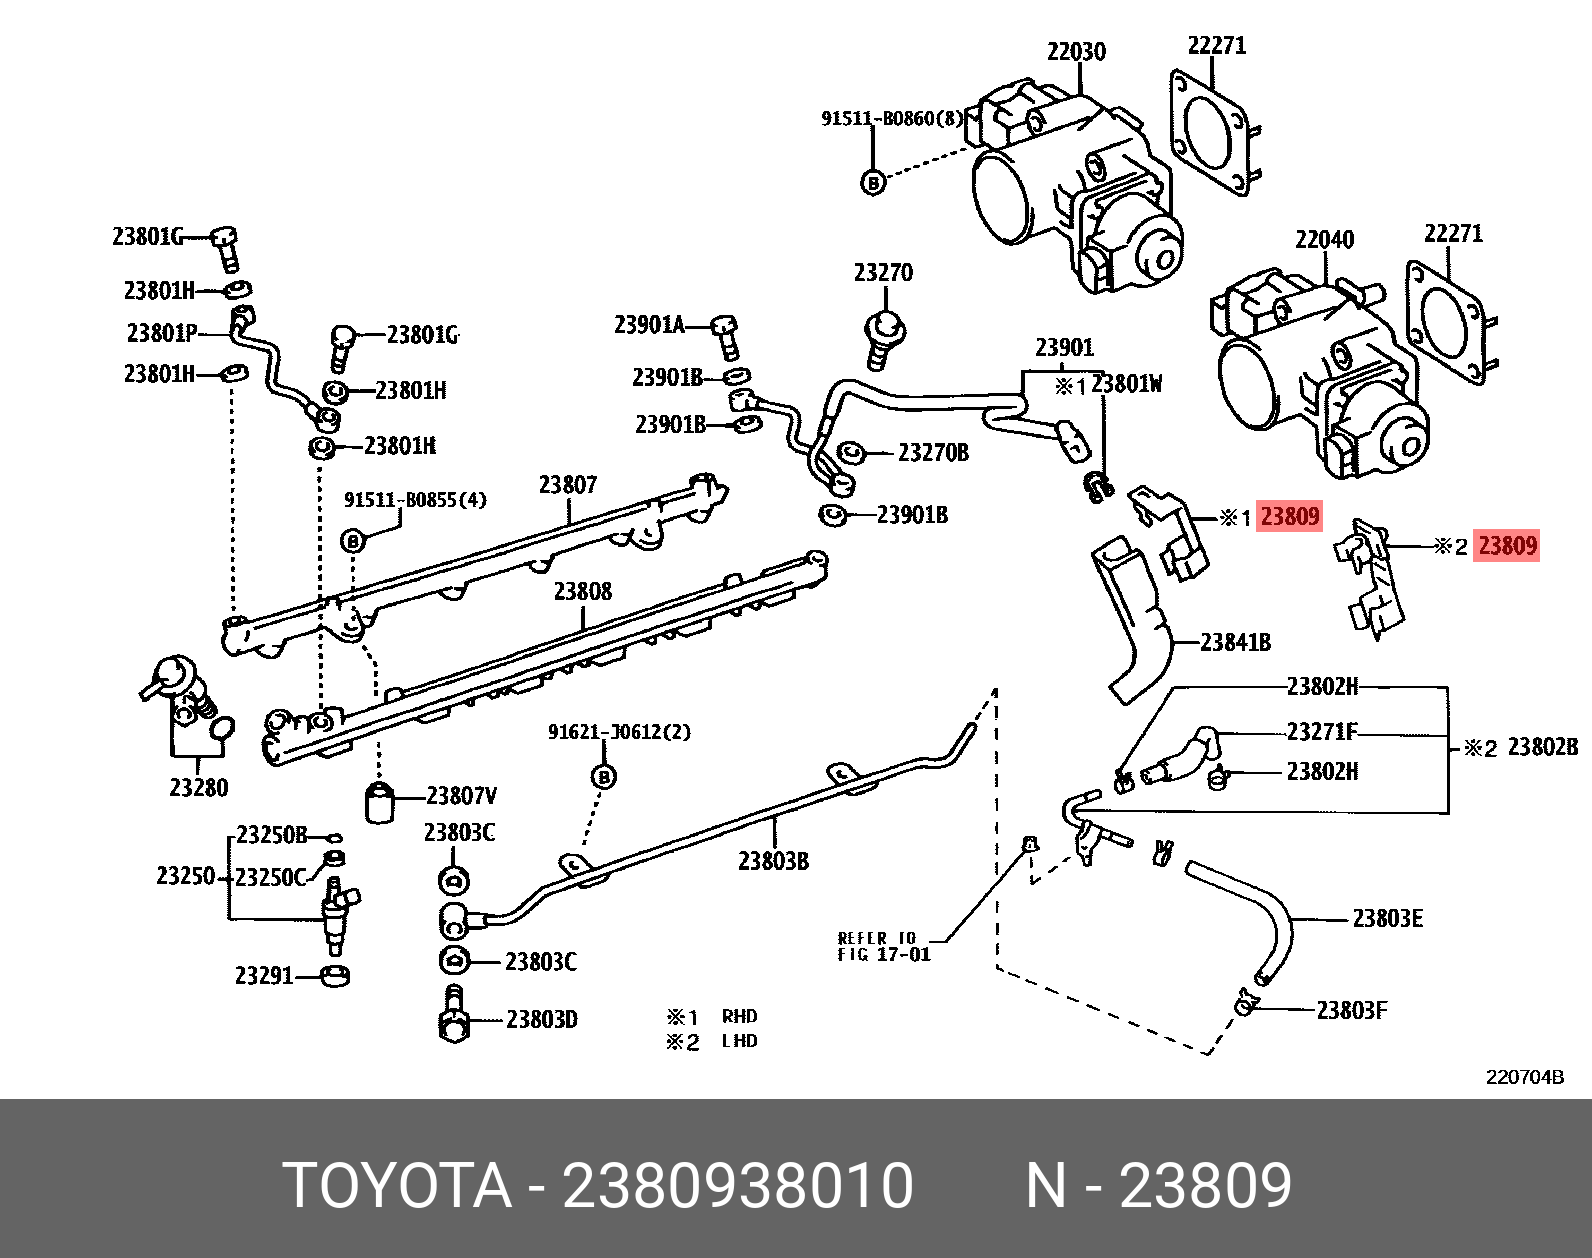 CENTURY 201806 - , SUPPORT SUB-ASSY, FUEL PIPE